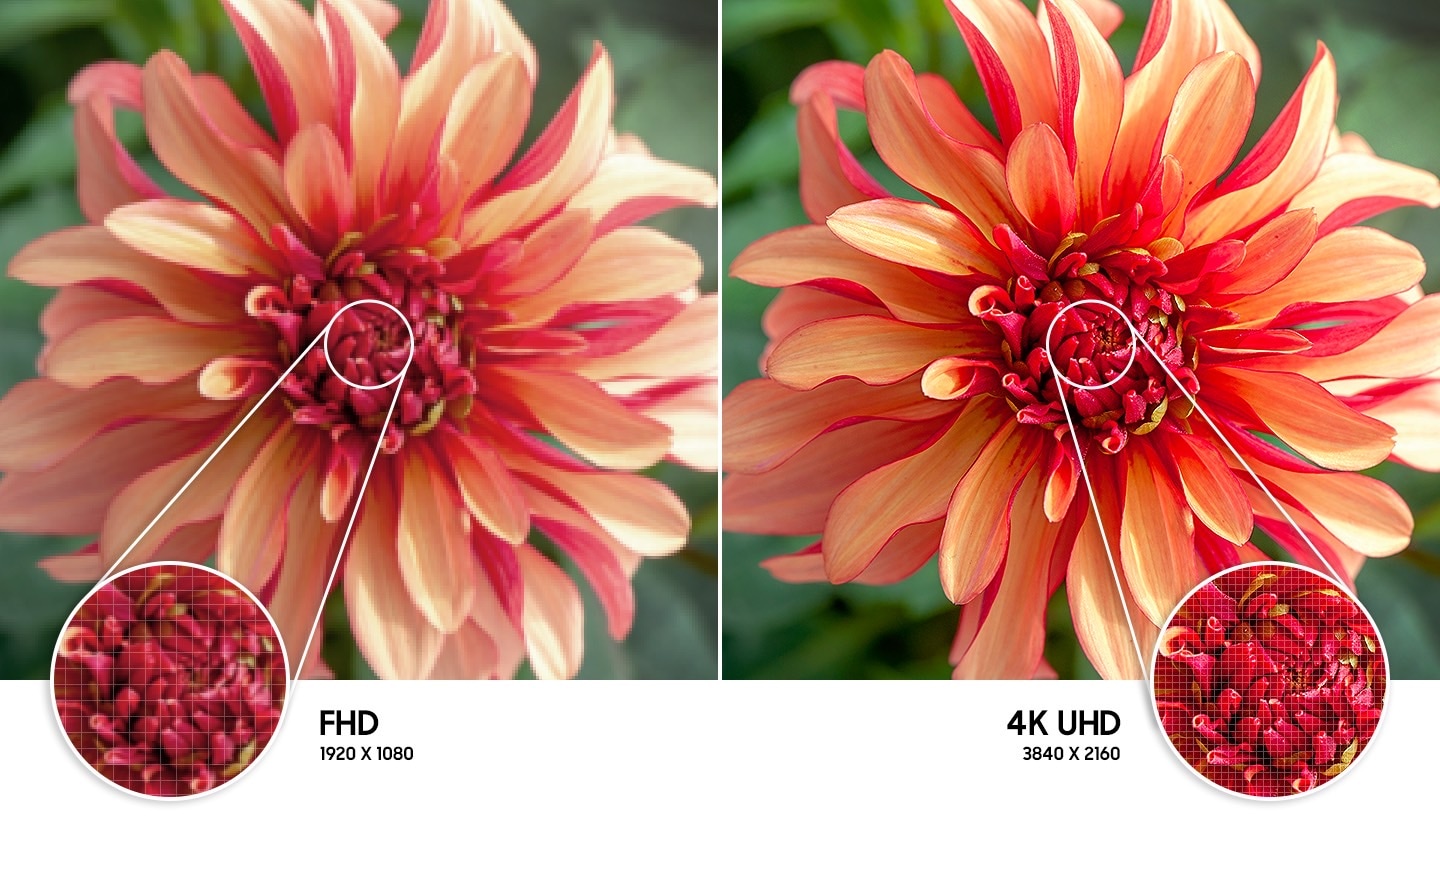 2697_ro-feature-feel-the-reality-of-4k-uhd-resolution-394767950.jpeg